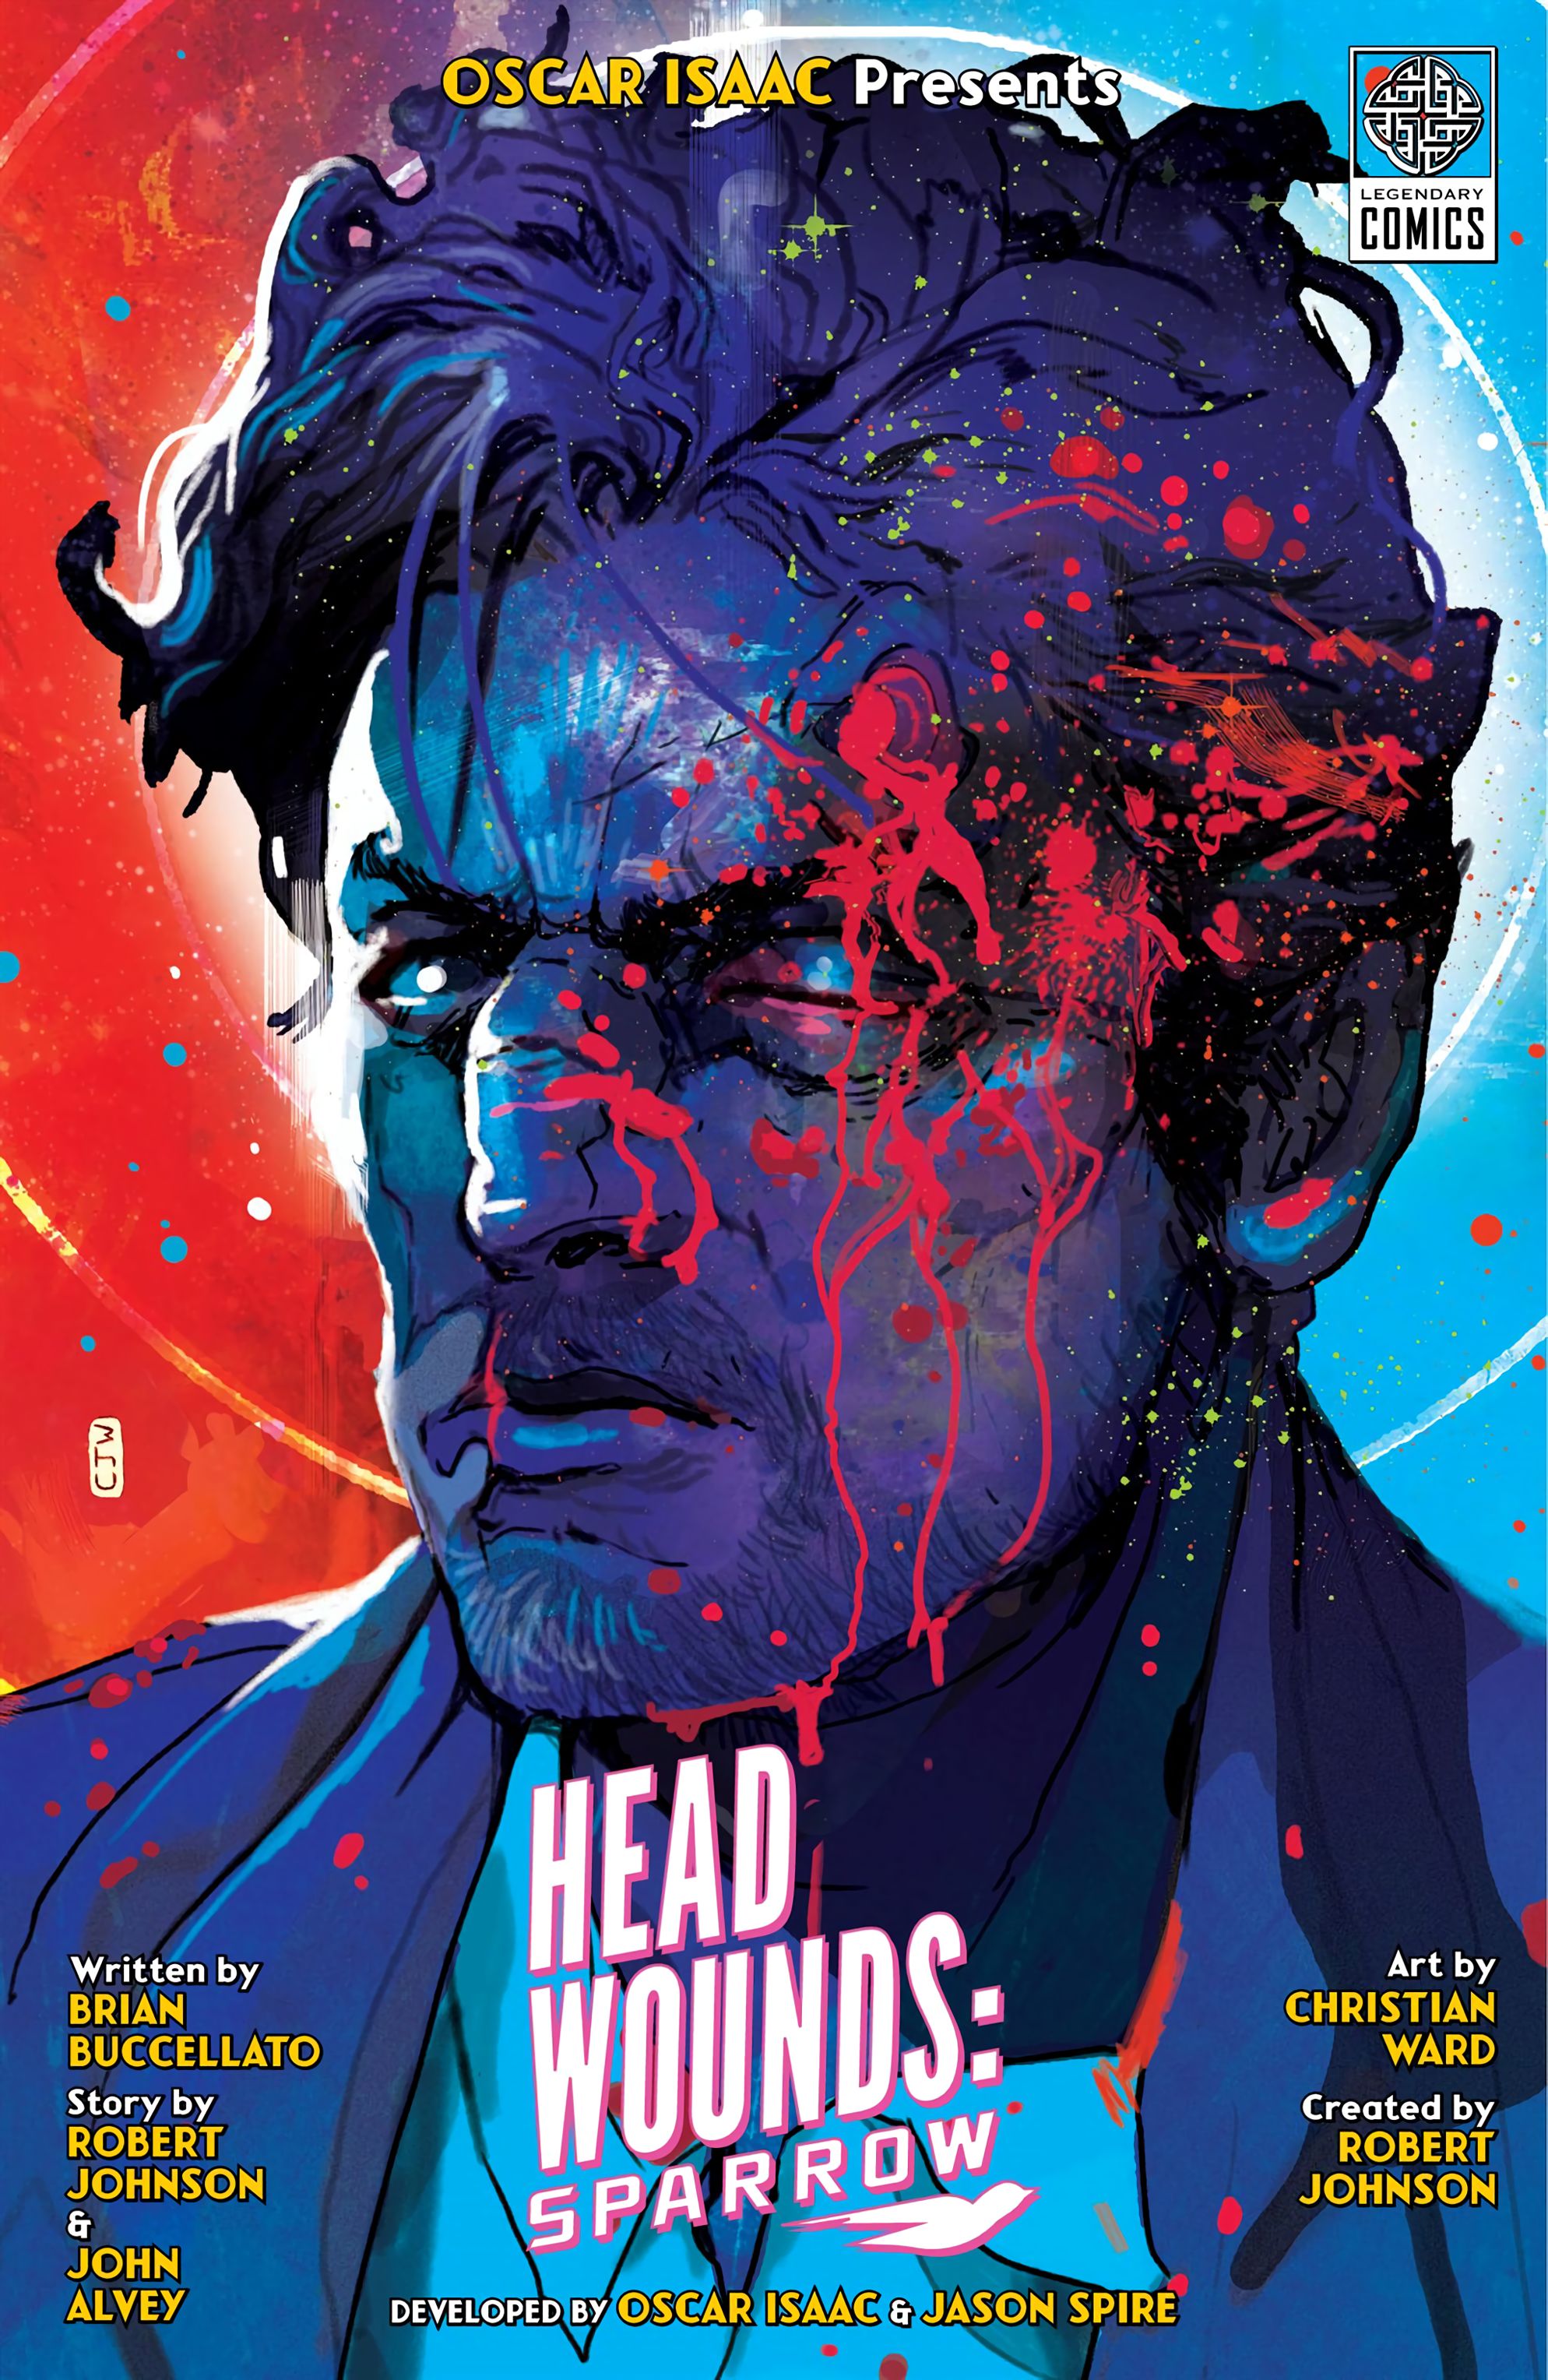 Read online Head Wounds: Sparrow comic -  Issue # TPB - 1